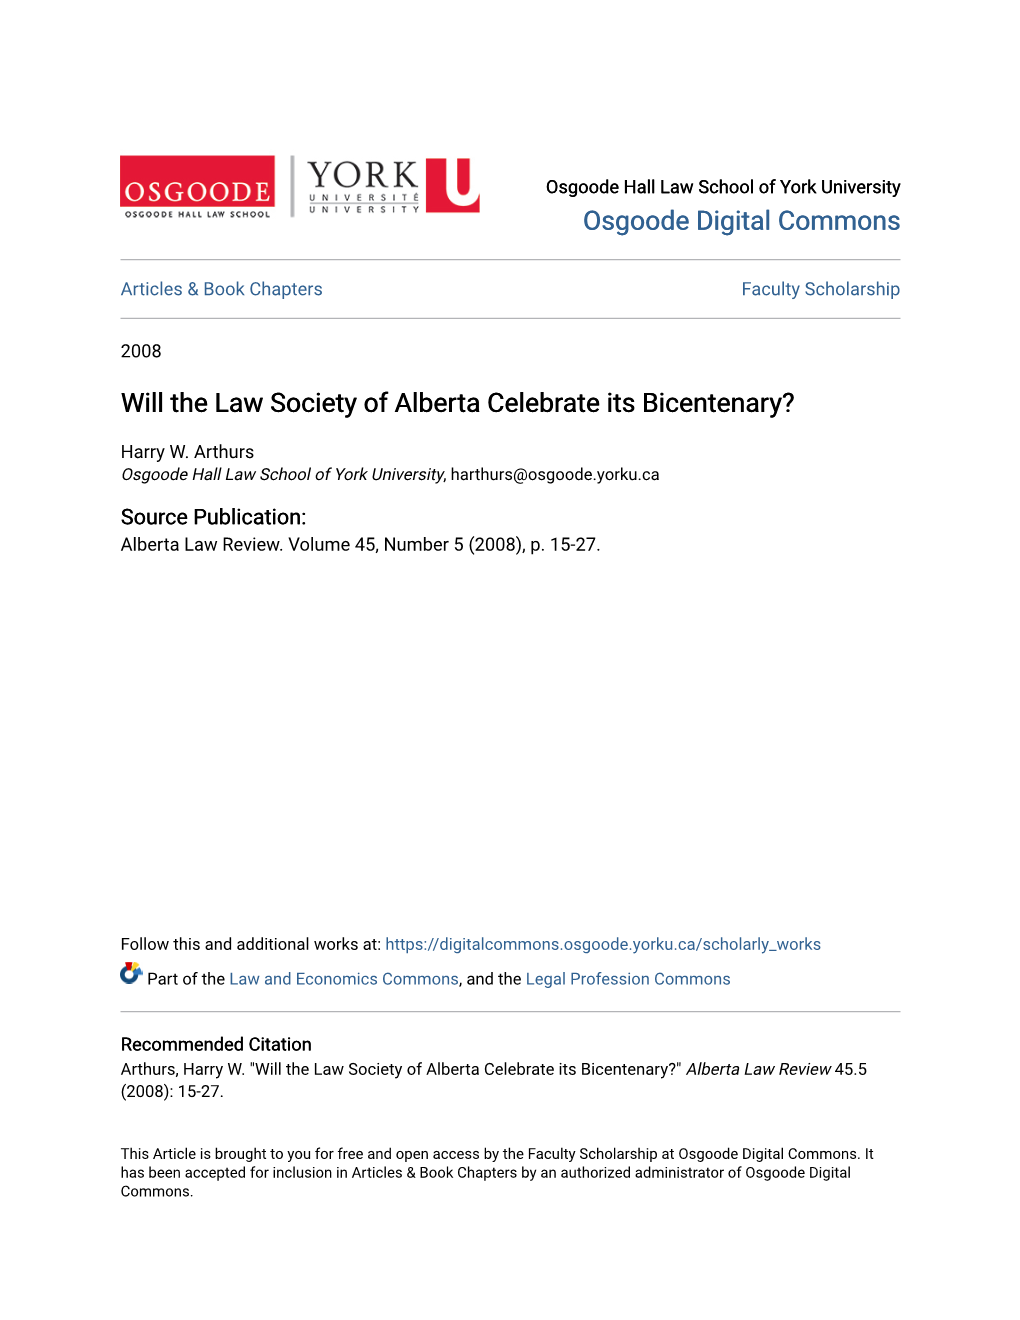 Will the Law Society of Alberta Celebrate Its Bicentenary?